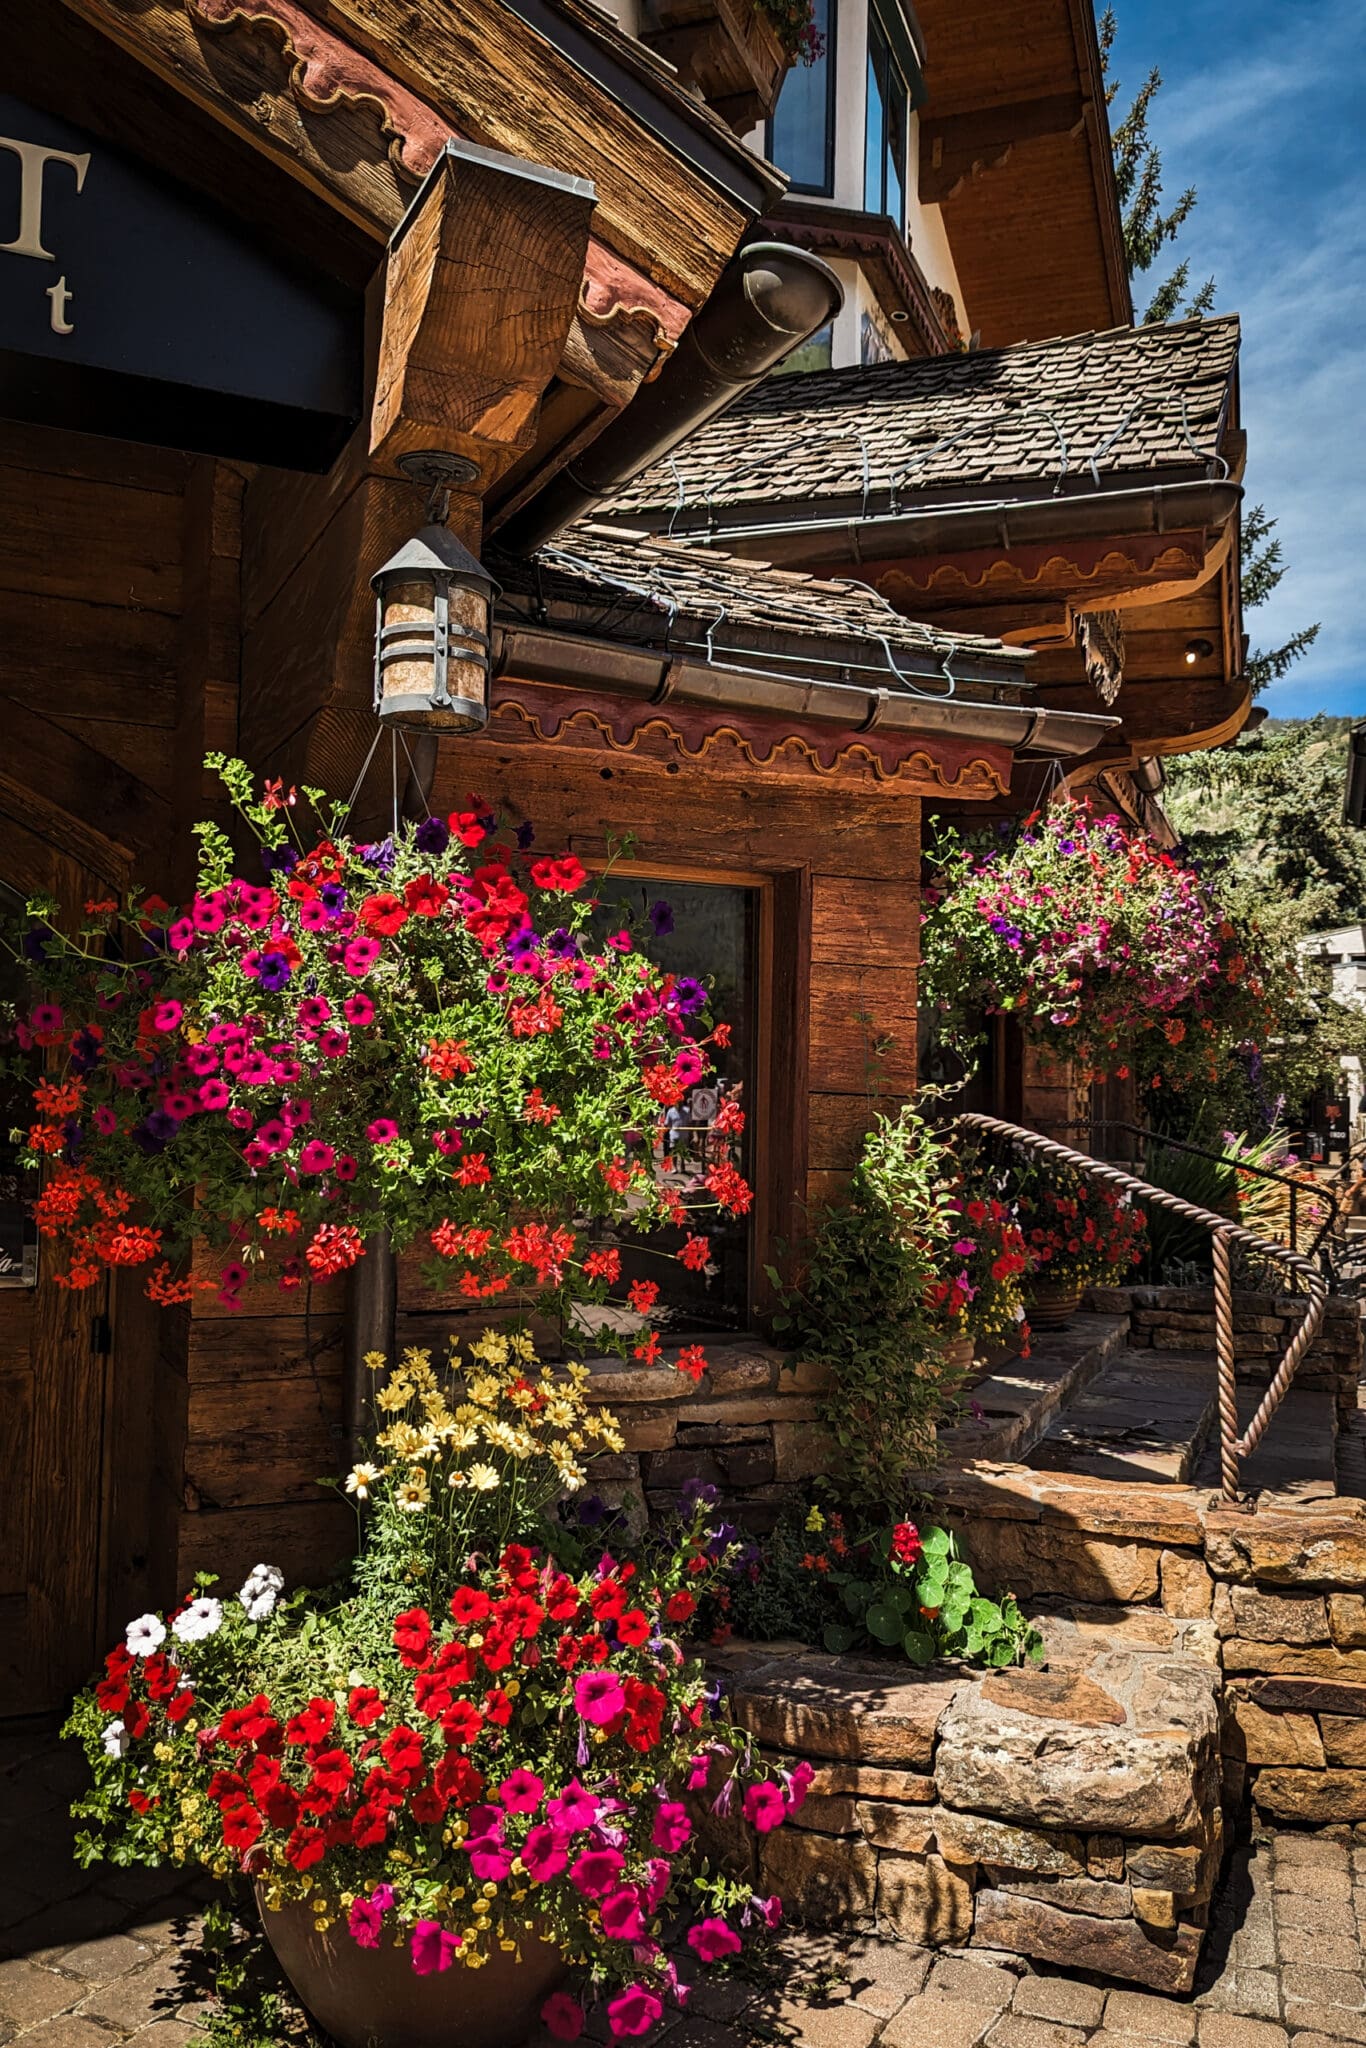 Building with flowers in Vail, Colorado